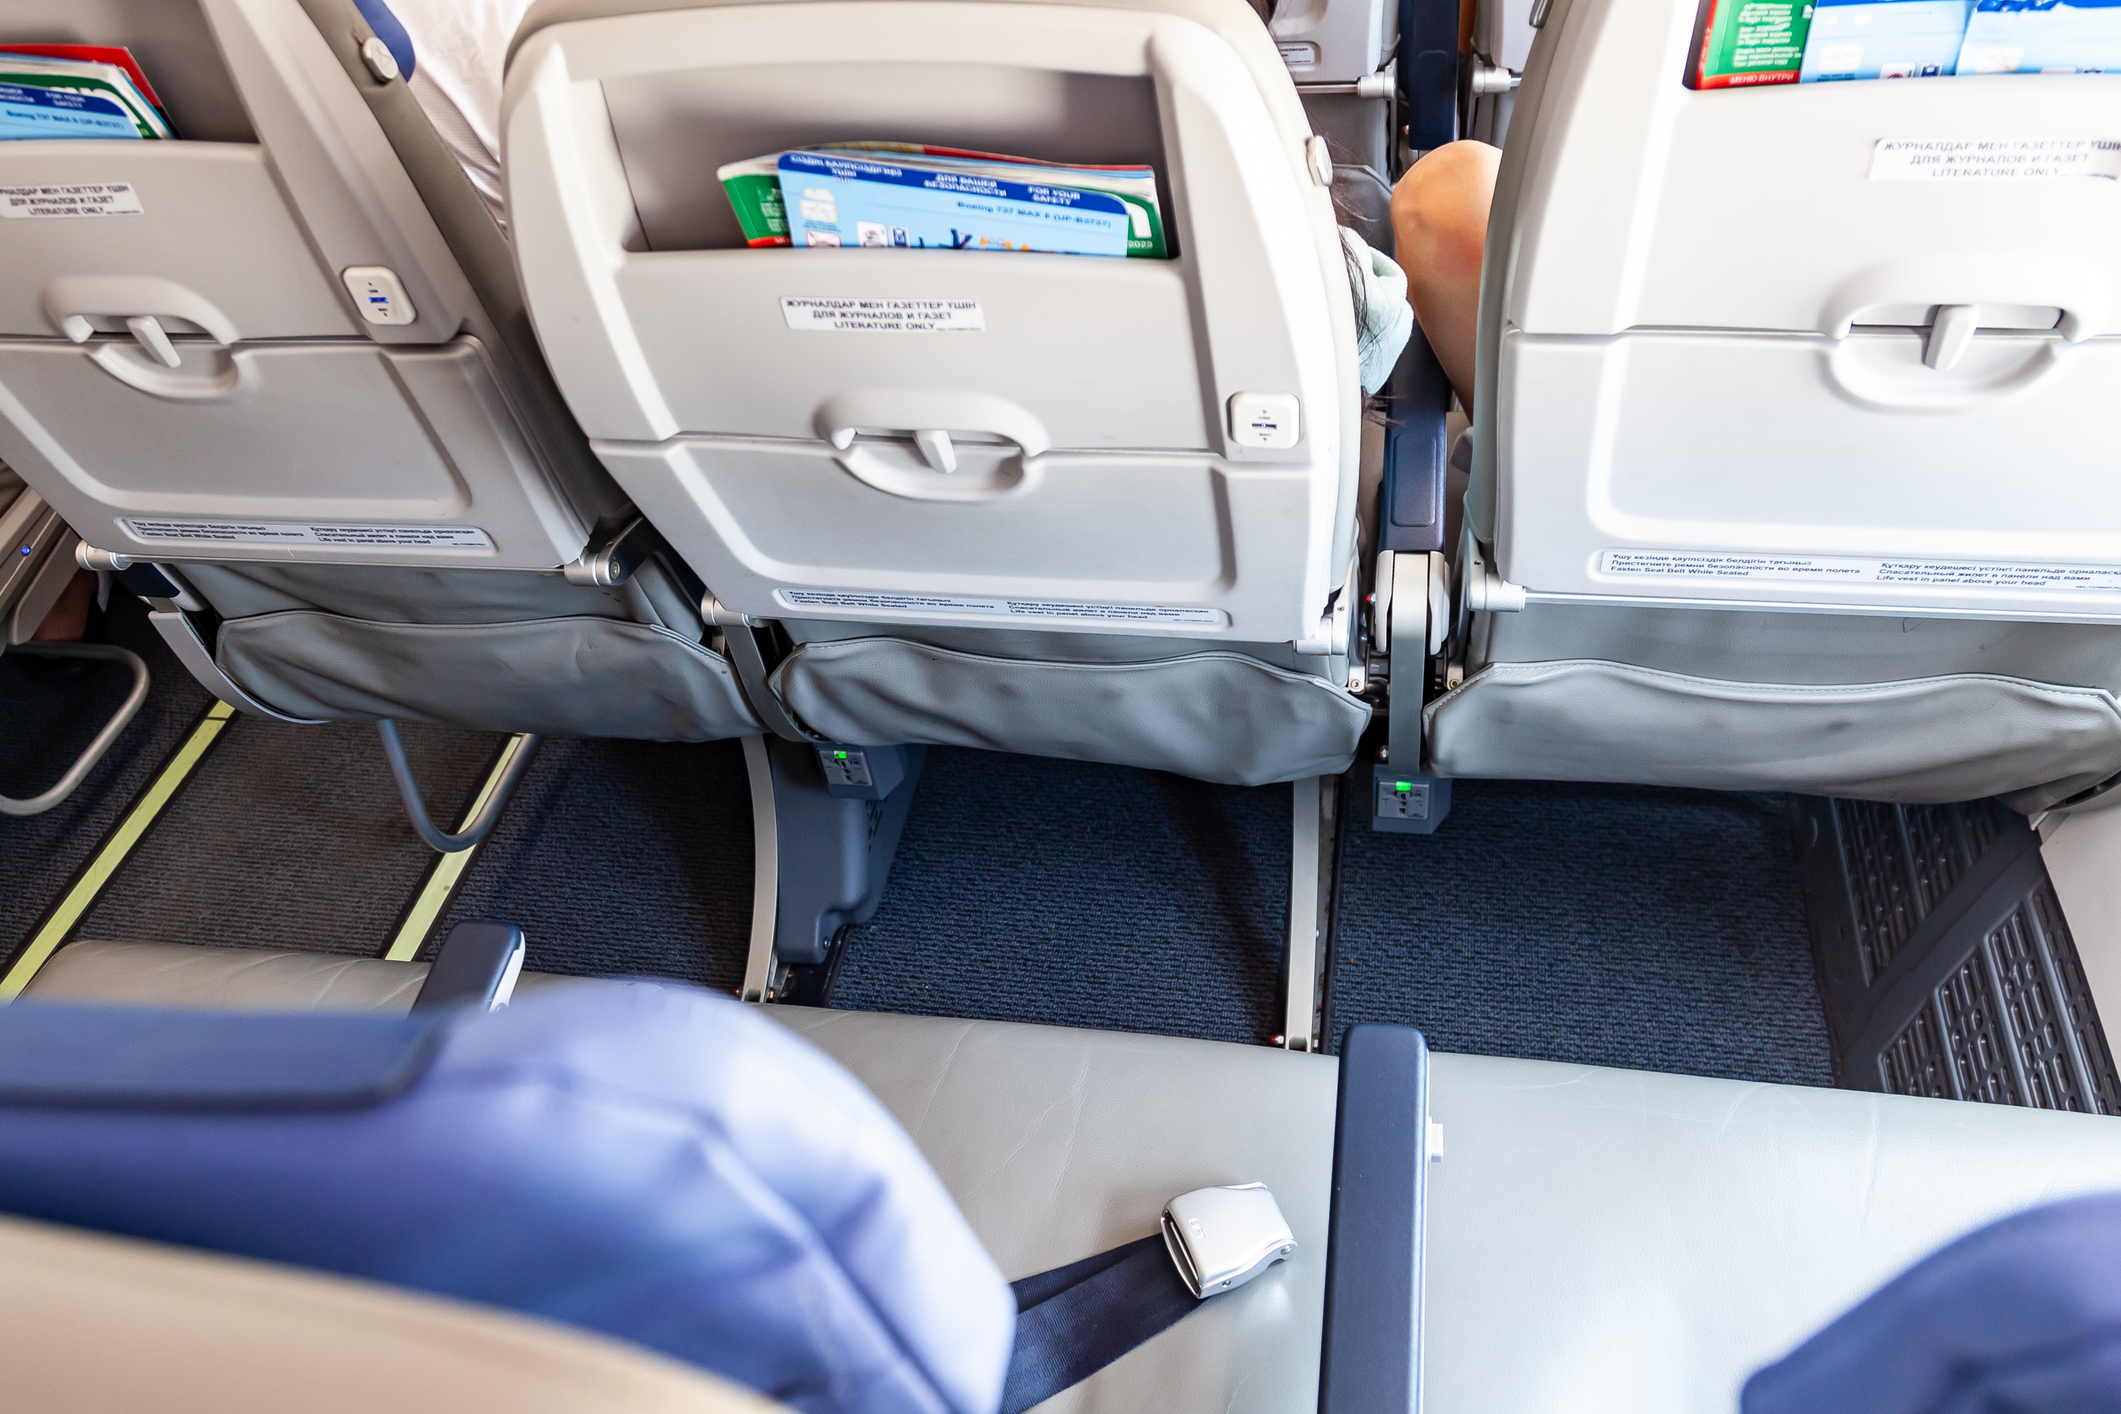 Want to recline your seat on a flight? You'll have to pay more